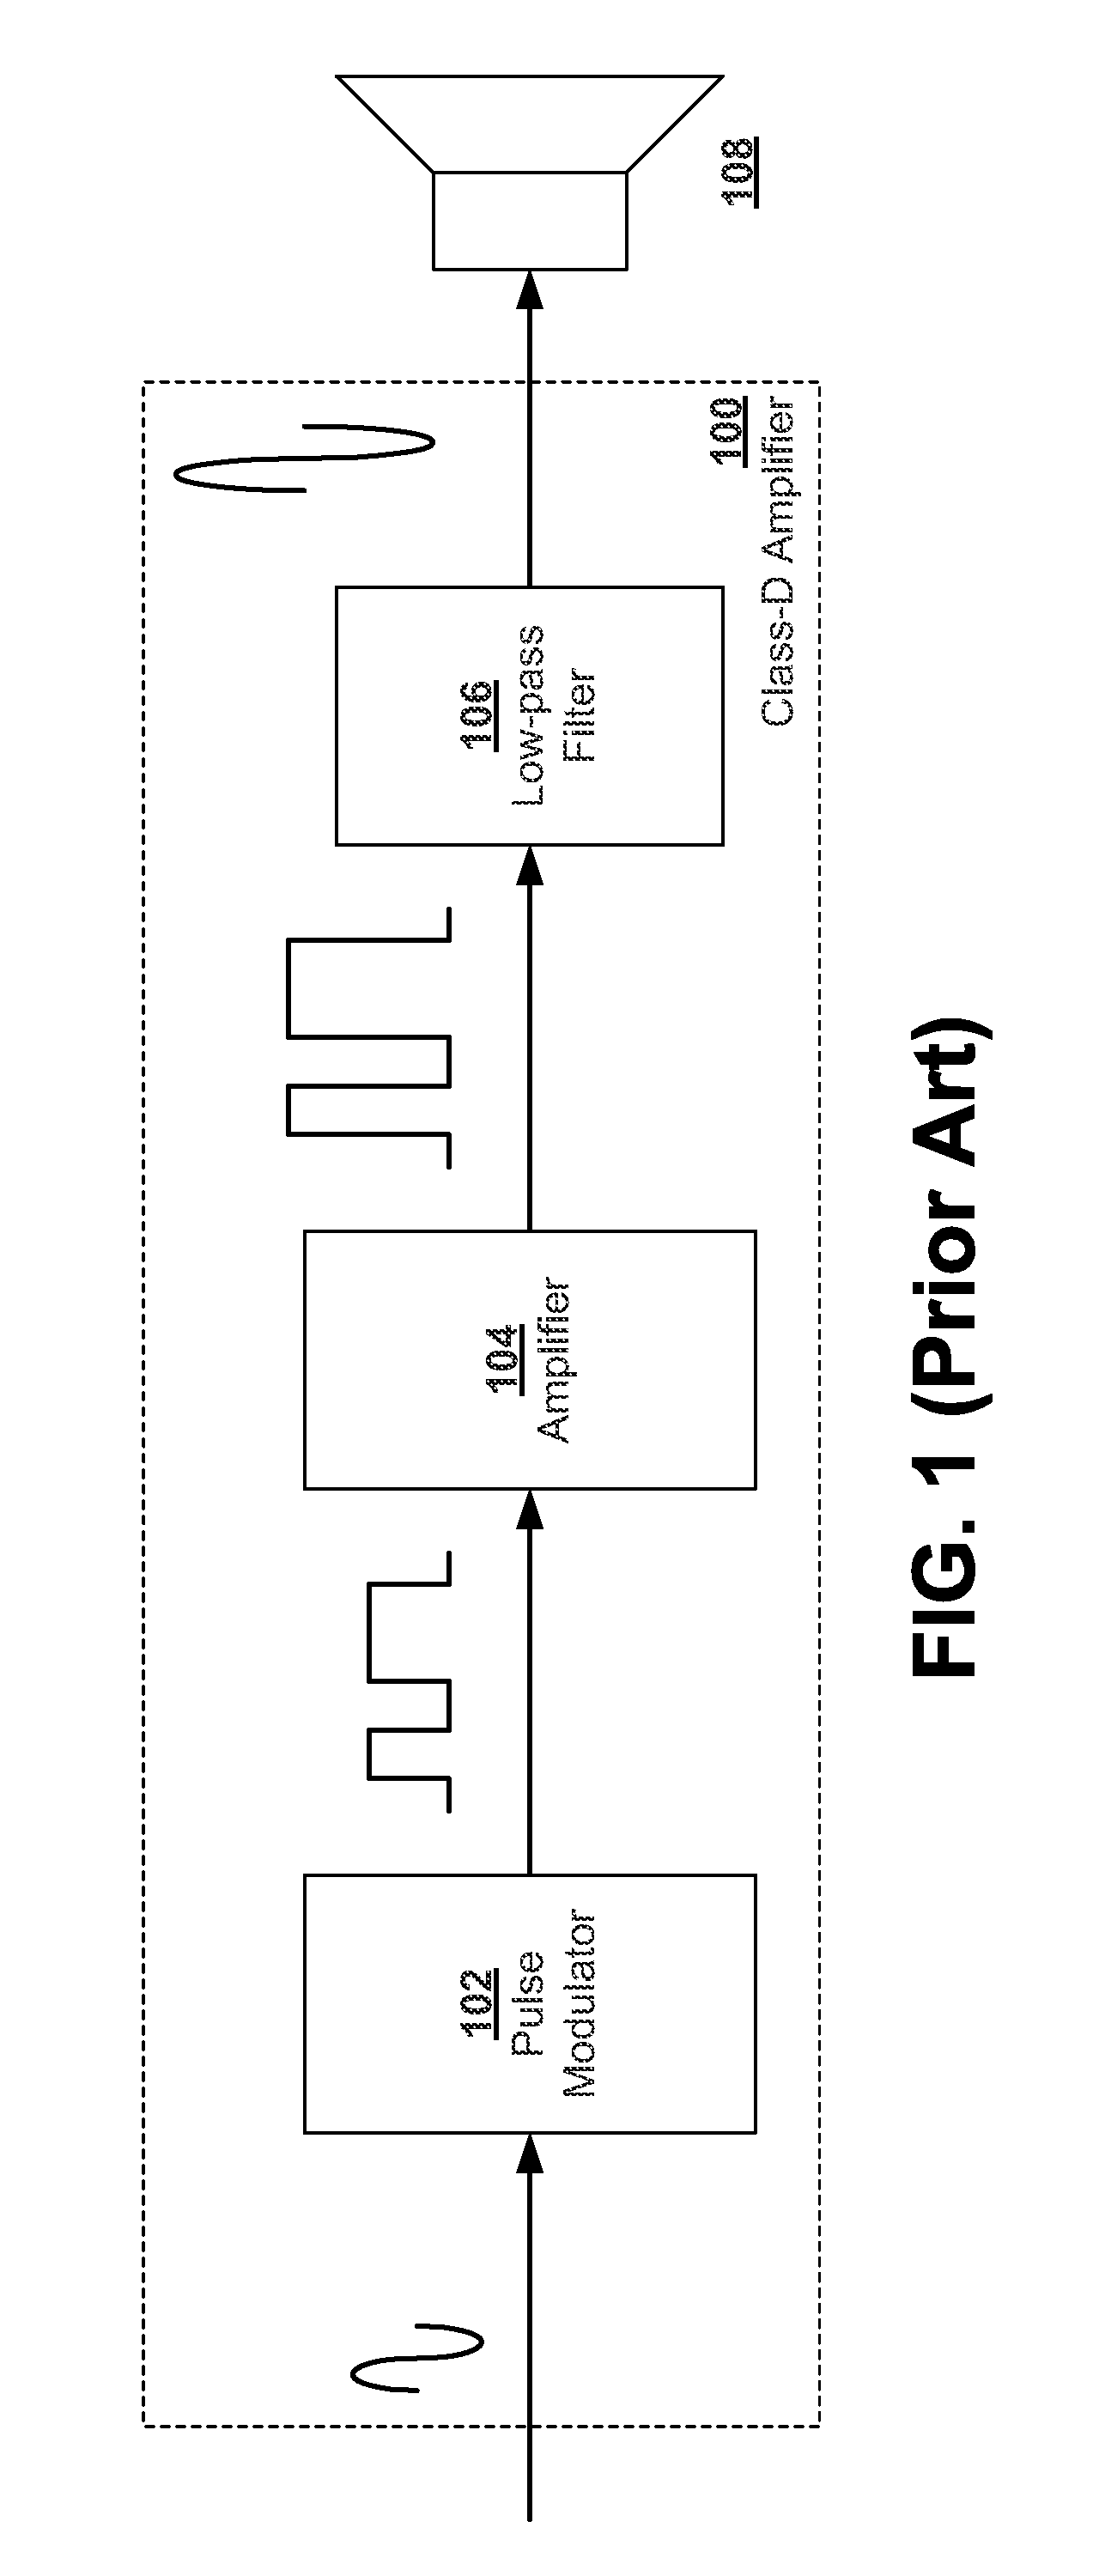 Noise-Shaped Scrambler for Reduced Out-of-Band Common-Mode Interference